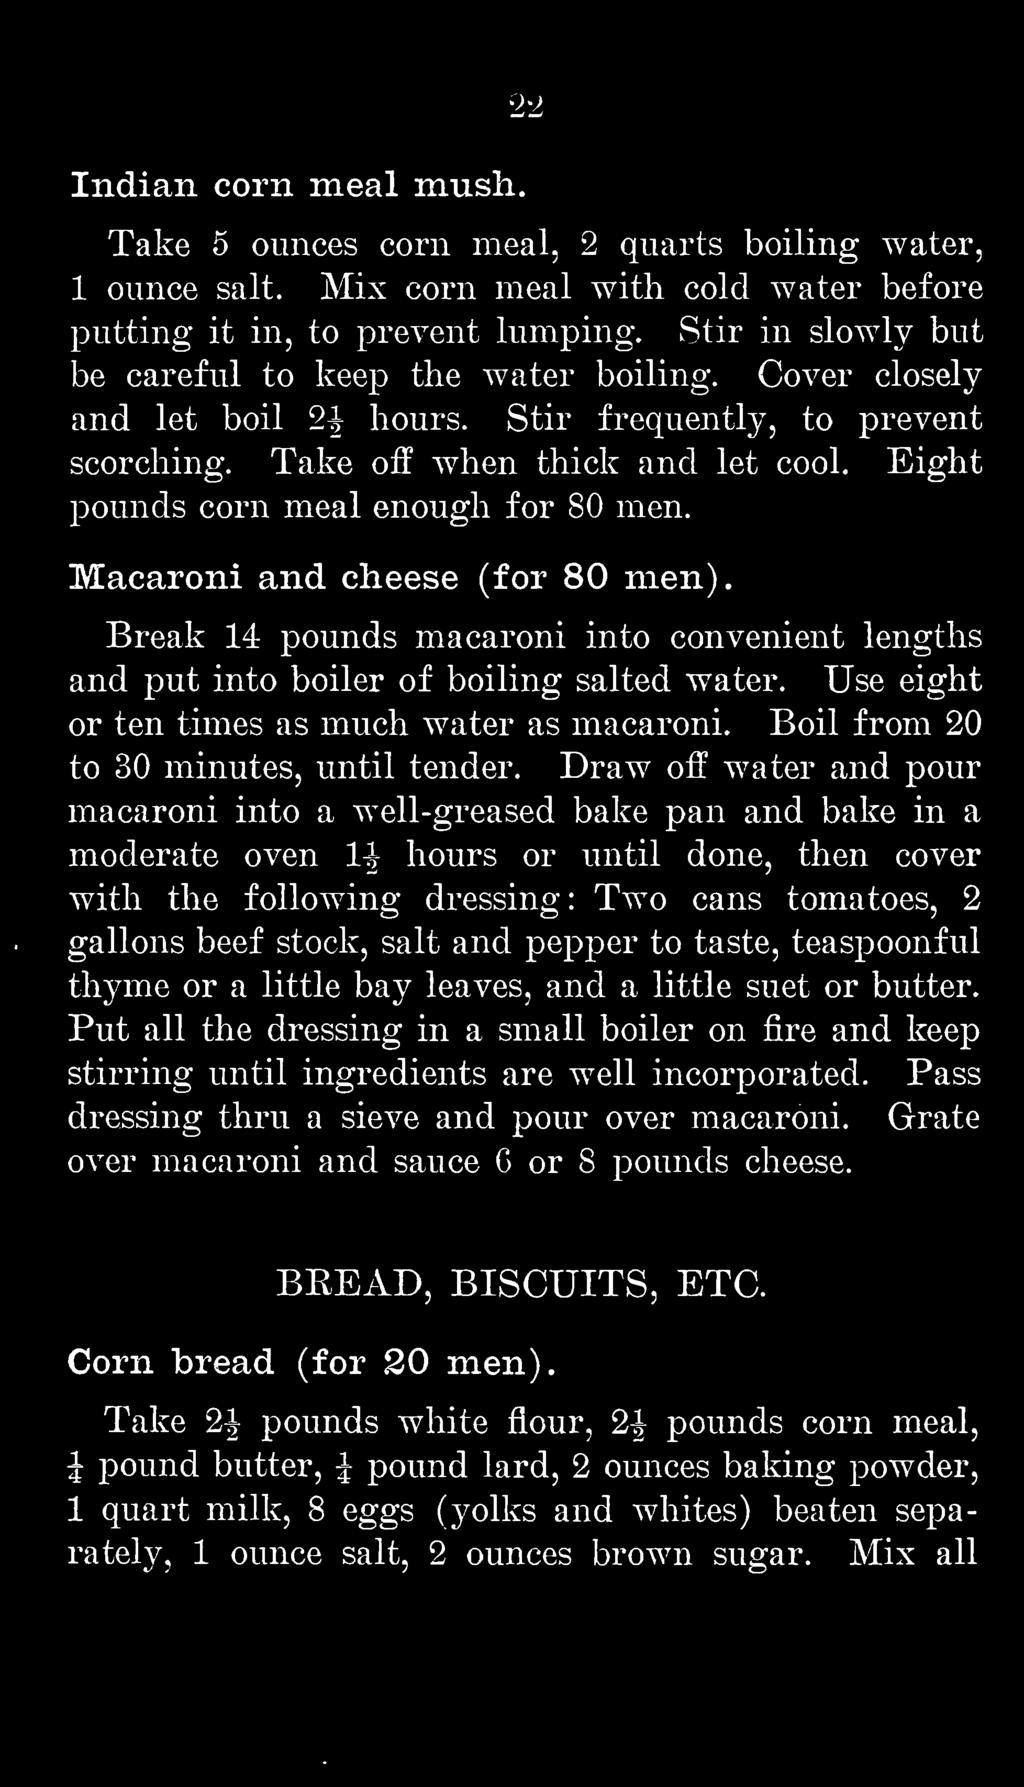 Draw off water and pour macaroni into a w^ell-greased bake pan and bake in a moderate oven 1^ hours or until done, then cover with the following dressing: Two cans tomatoes, 2 gallons beef stock,